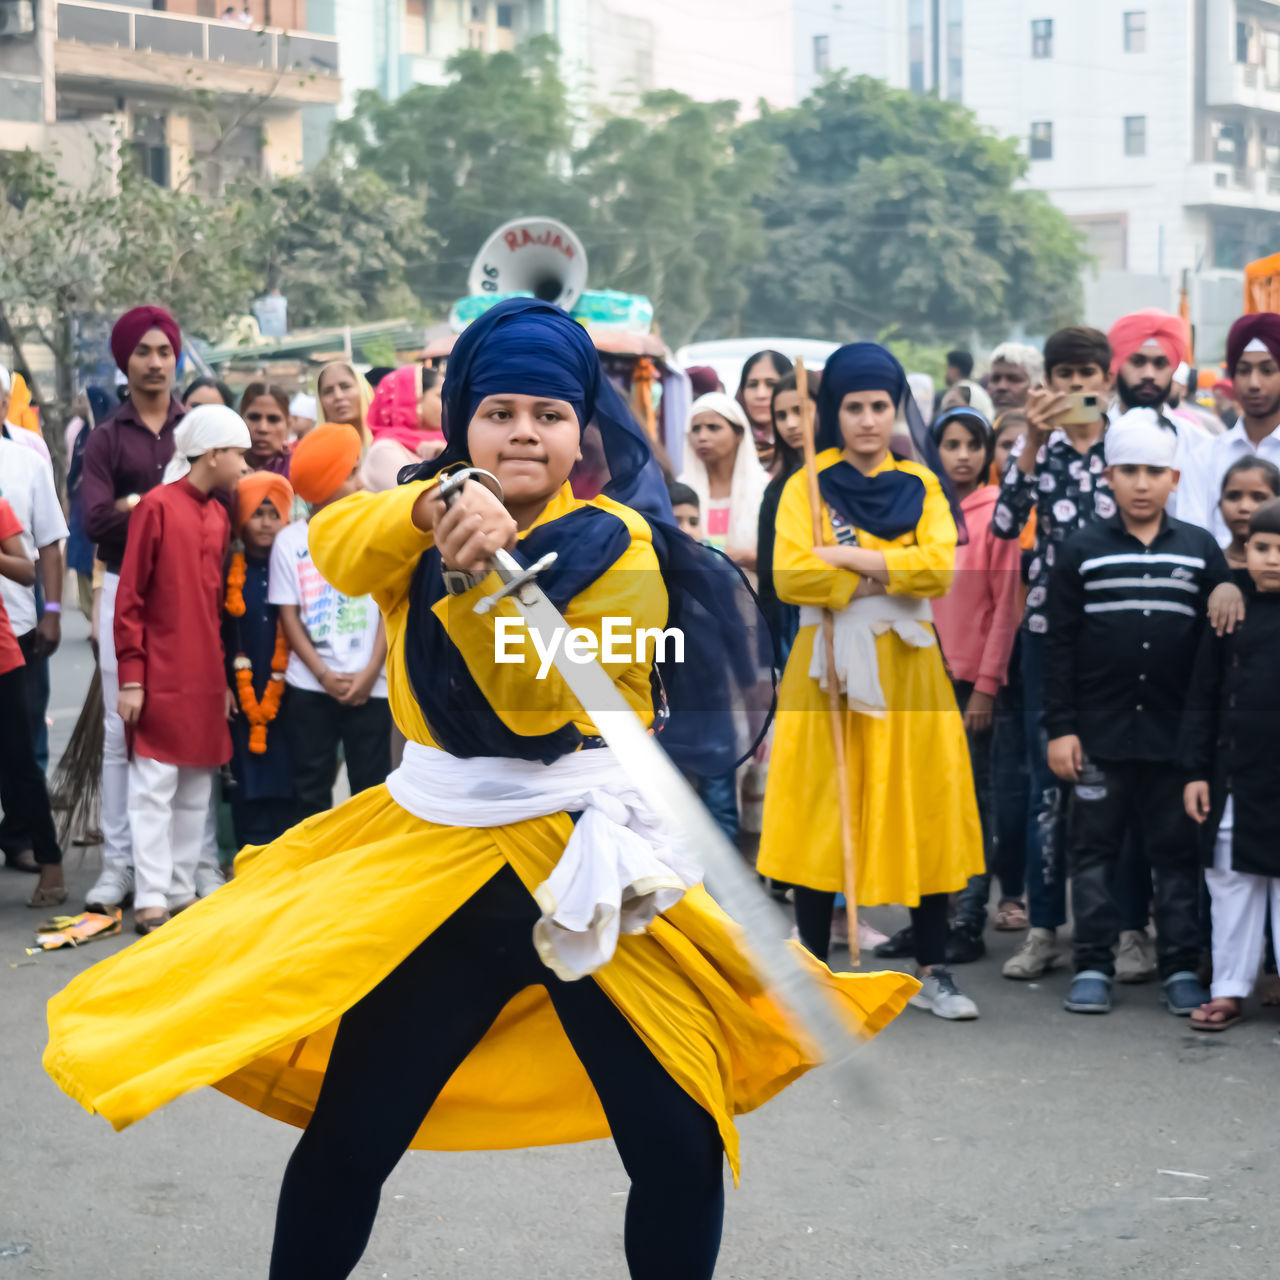 crowd, group of people, city, large group of people, architecture, event, yellow, women, men, adult, street, full length, festival, clothing, celebration, arts culture and entertainment, happiness, building exterior, costume, togetherness, carnival, emotion, female, enjoyment, smiling, outdoors, fun, child